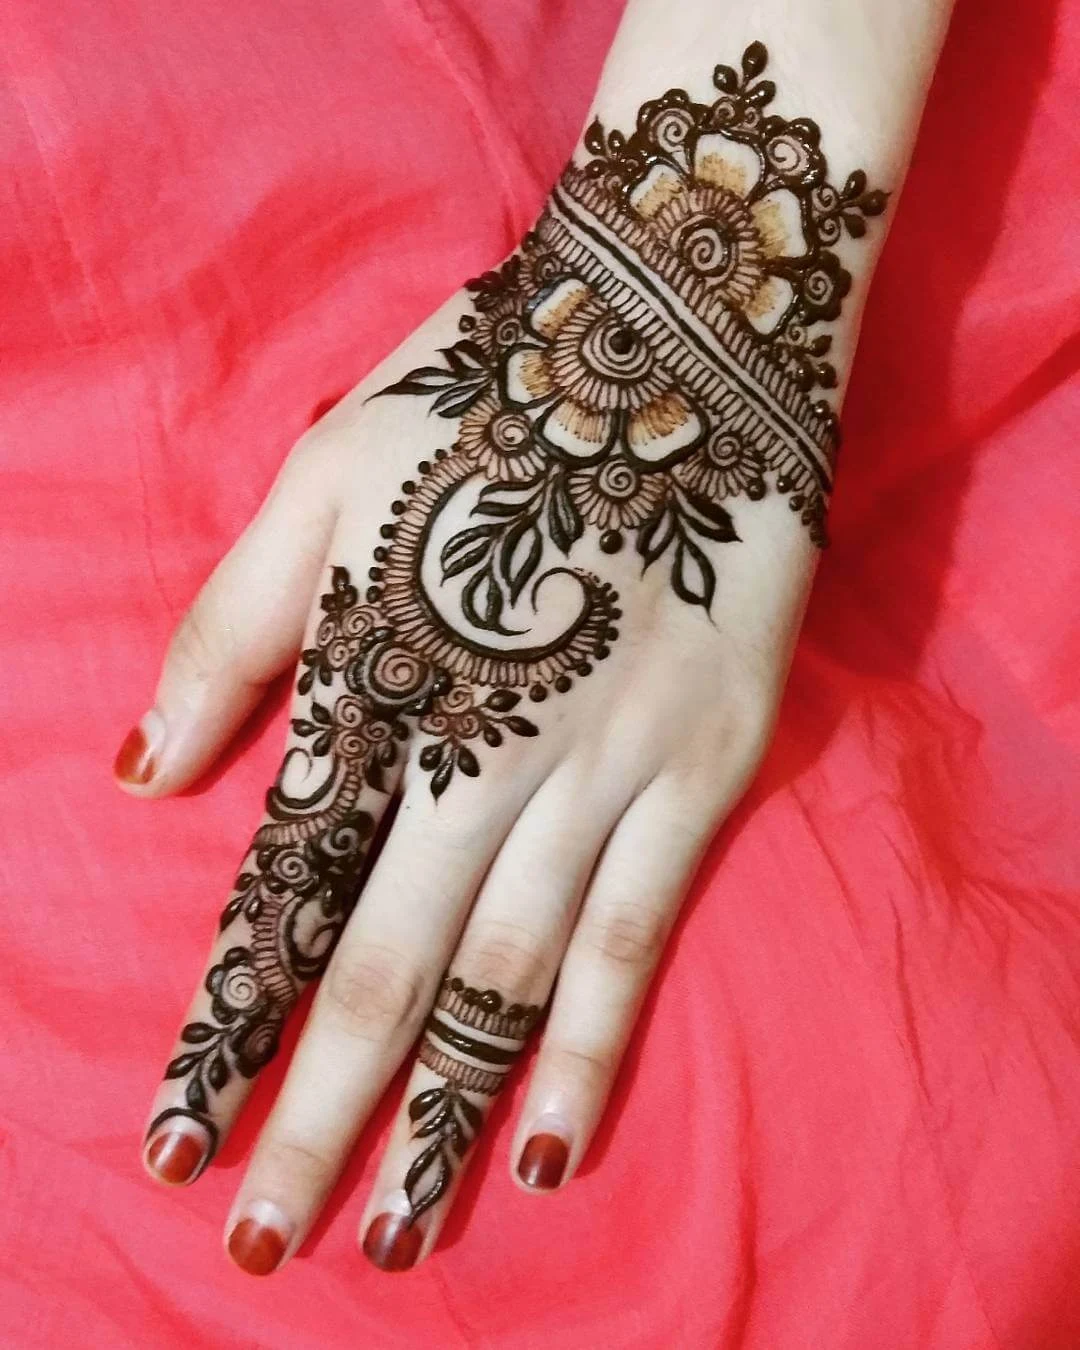 Cute Arabic Mehndi Designs 2021 With Videos For Hands Daily Infotainment